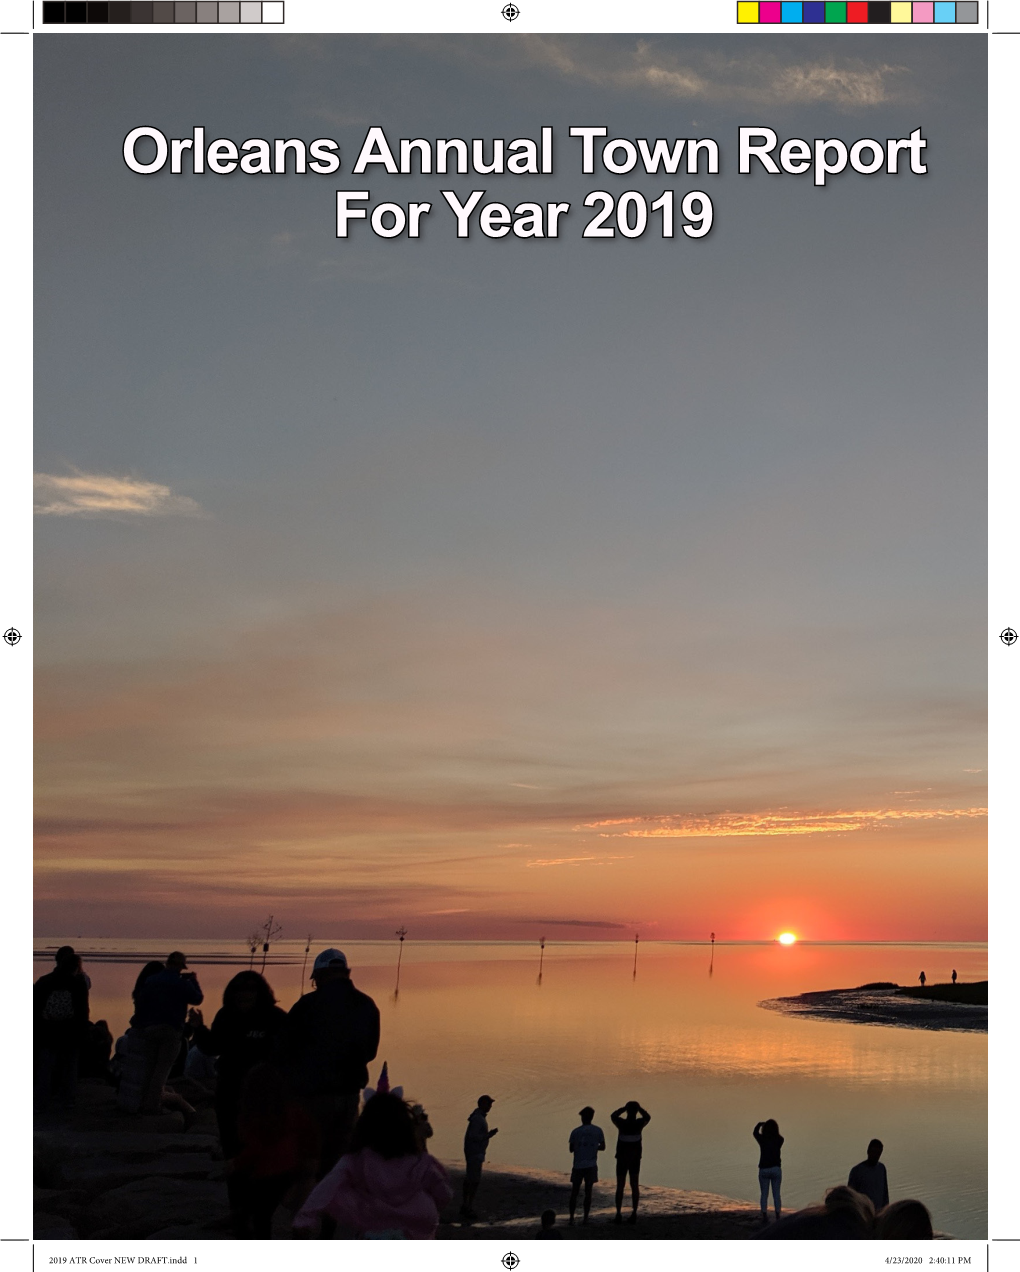 Orleans Annual Town Report for Year 2019